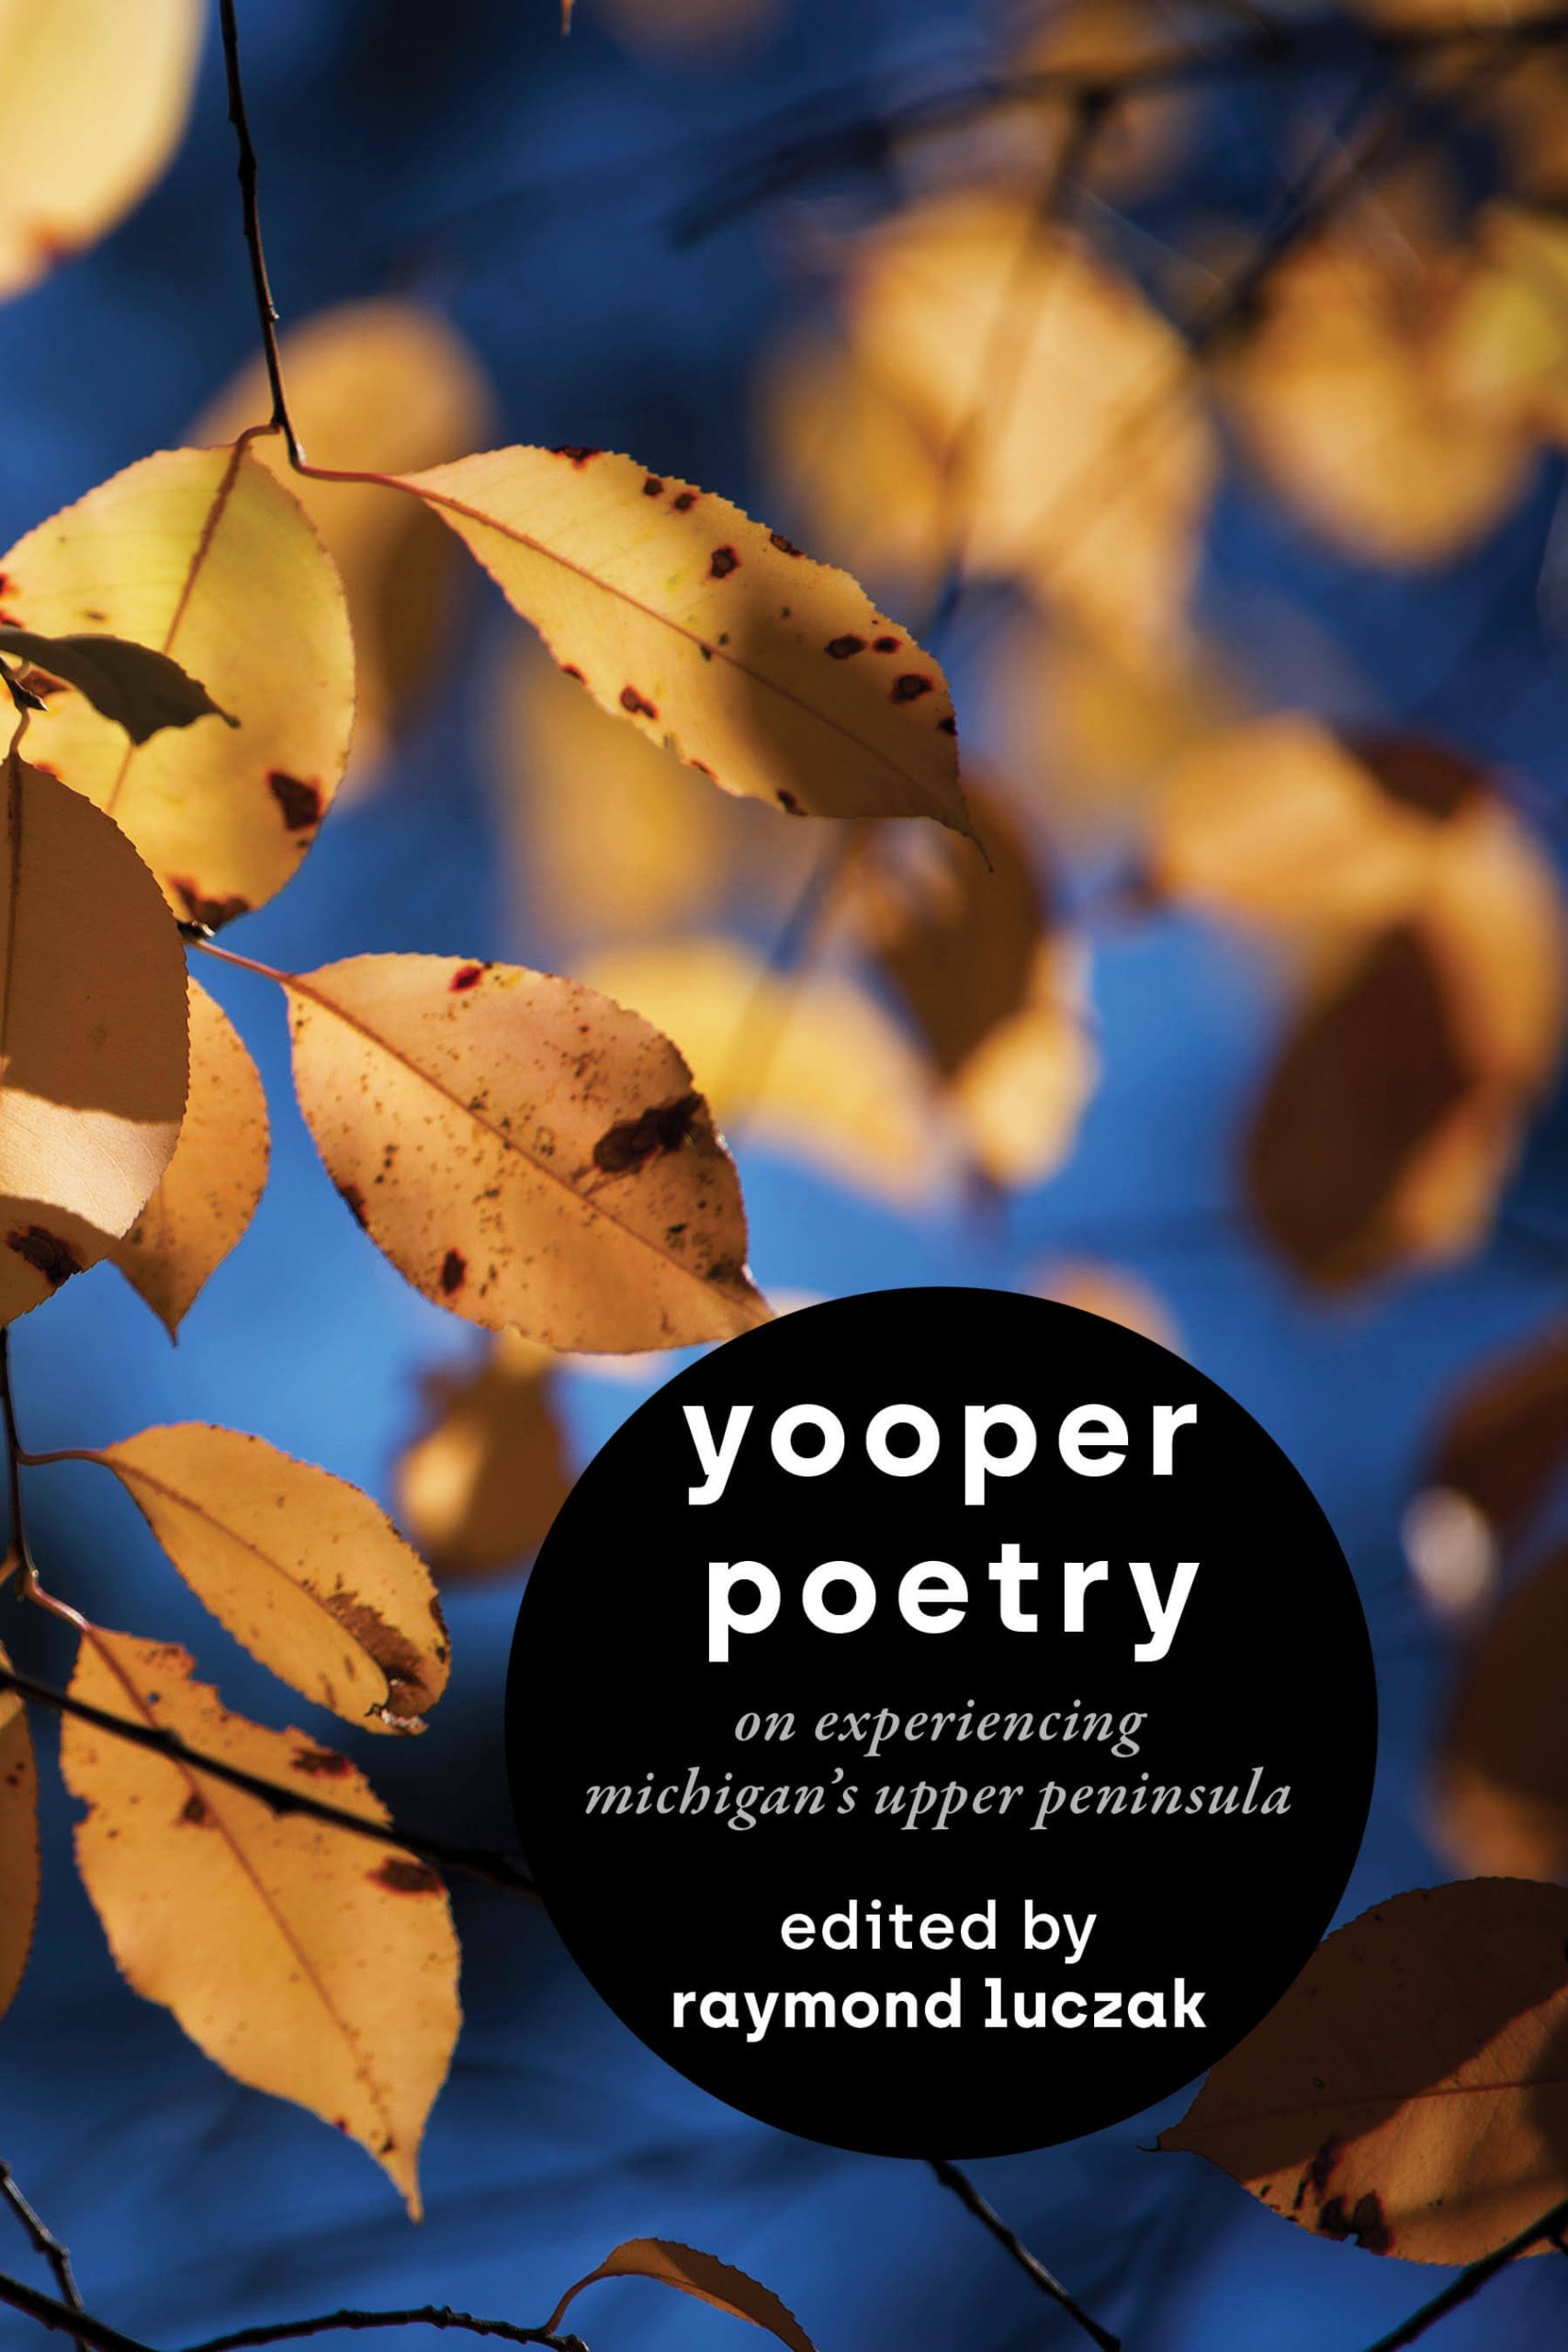 From the left side of the book cover, some yellow oval leaves with brown spots hang closely to us. In the short distance, more such leaves hang against a bold blue sky. All leaves are mottled in a mix of bright sunlight and shadow. On the lower right corner is a large black circle with the title in white (YOOPER POETRY), its subtitle in gray (ON EXPERIENCING MICHIGAN’S UPPER PENINSULA), and its editor’s name in white (EDITED BY RAYMOND LUCZAK).